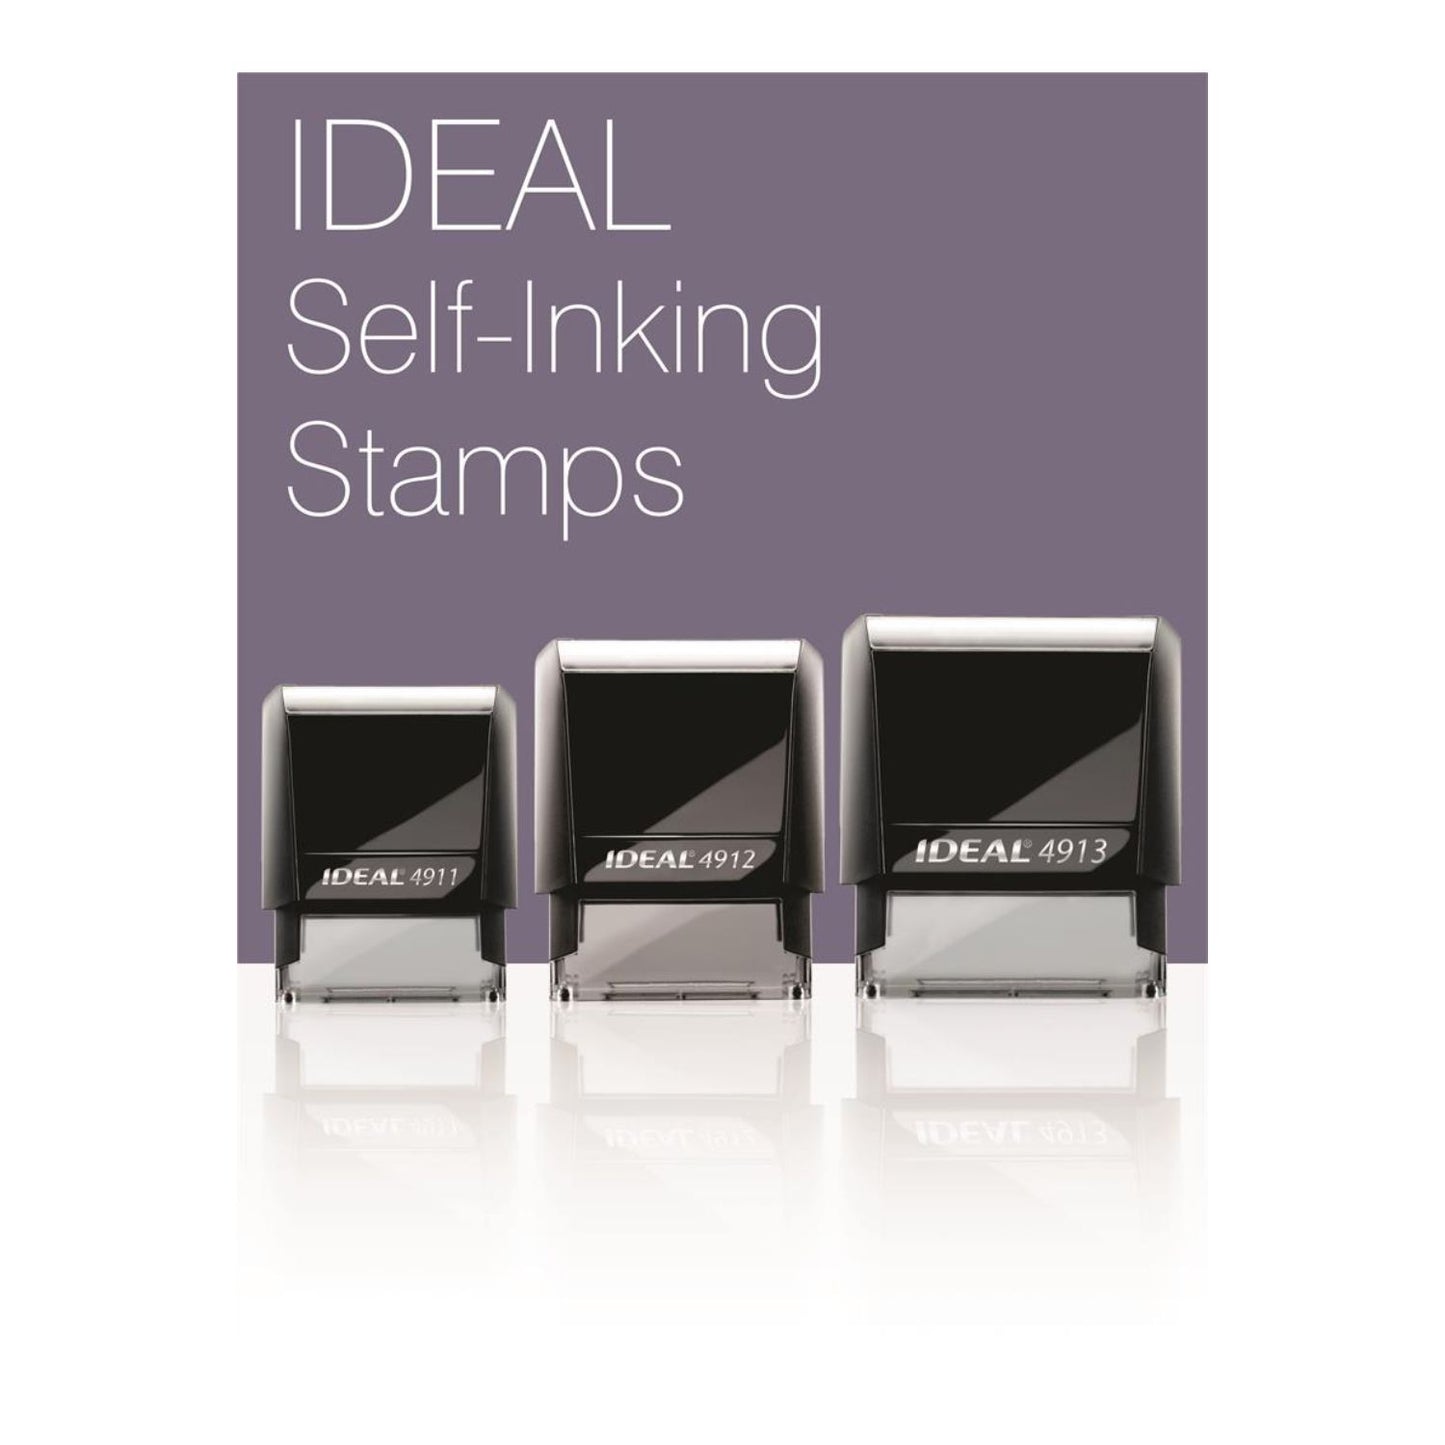 IDEAL Catalog Sheets - Rubber Stamp Materials